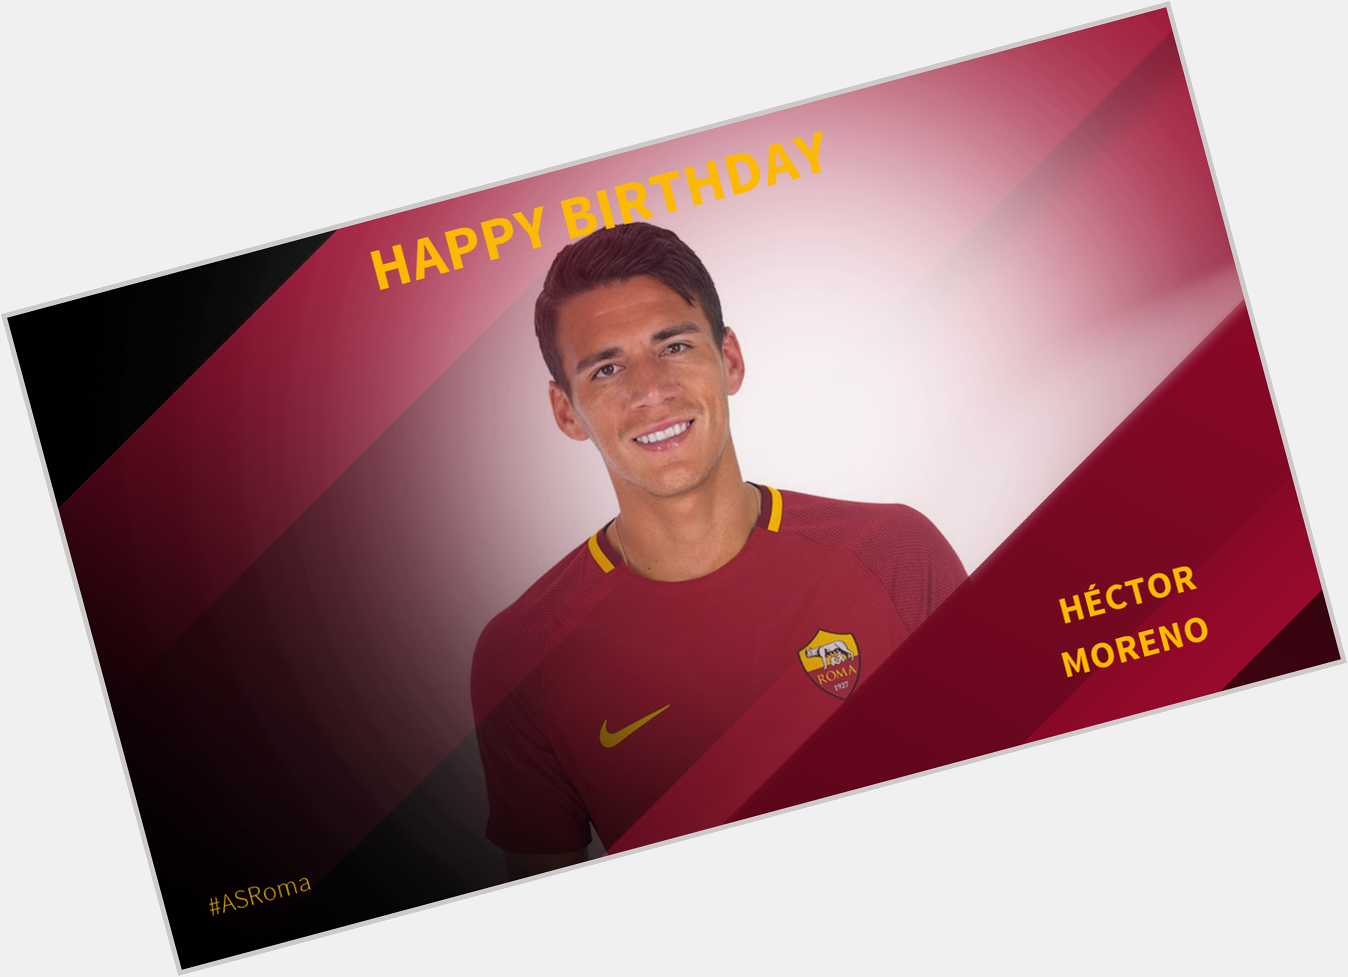 Happy birthday to defender Hector Moreno, who turns 30 today!        